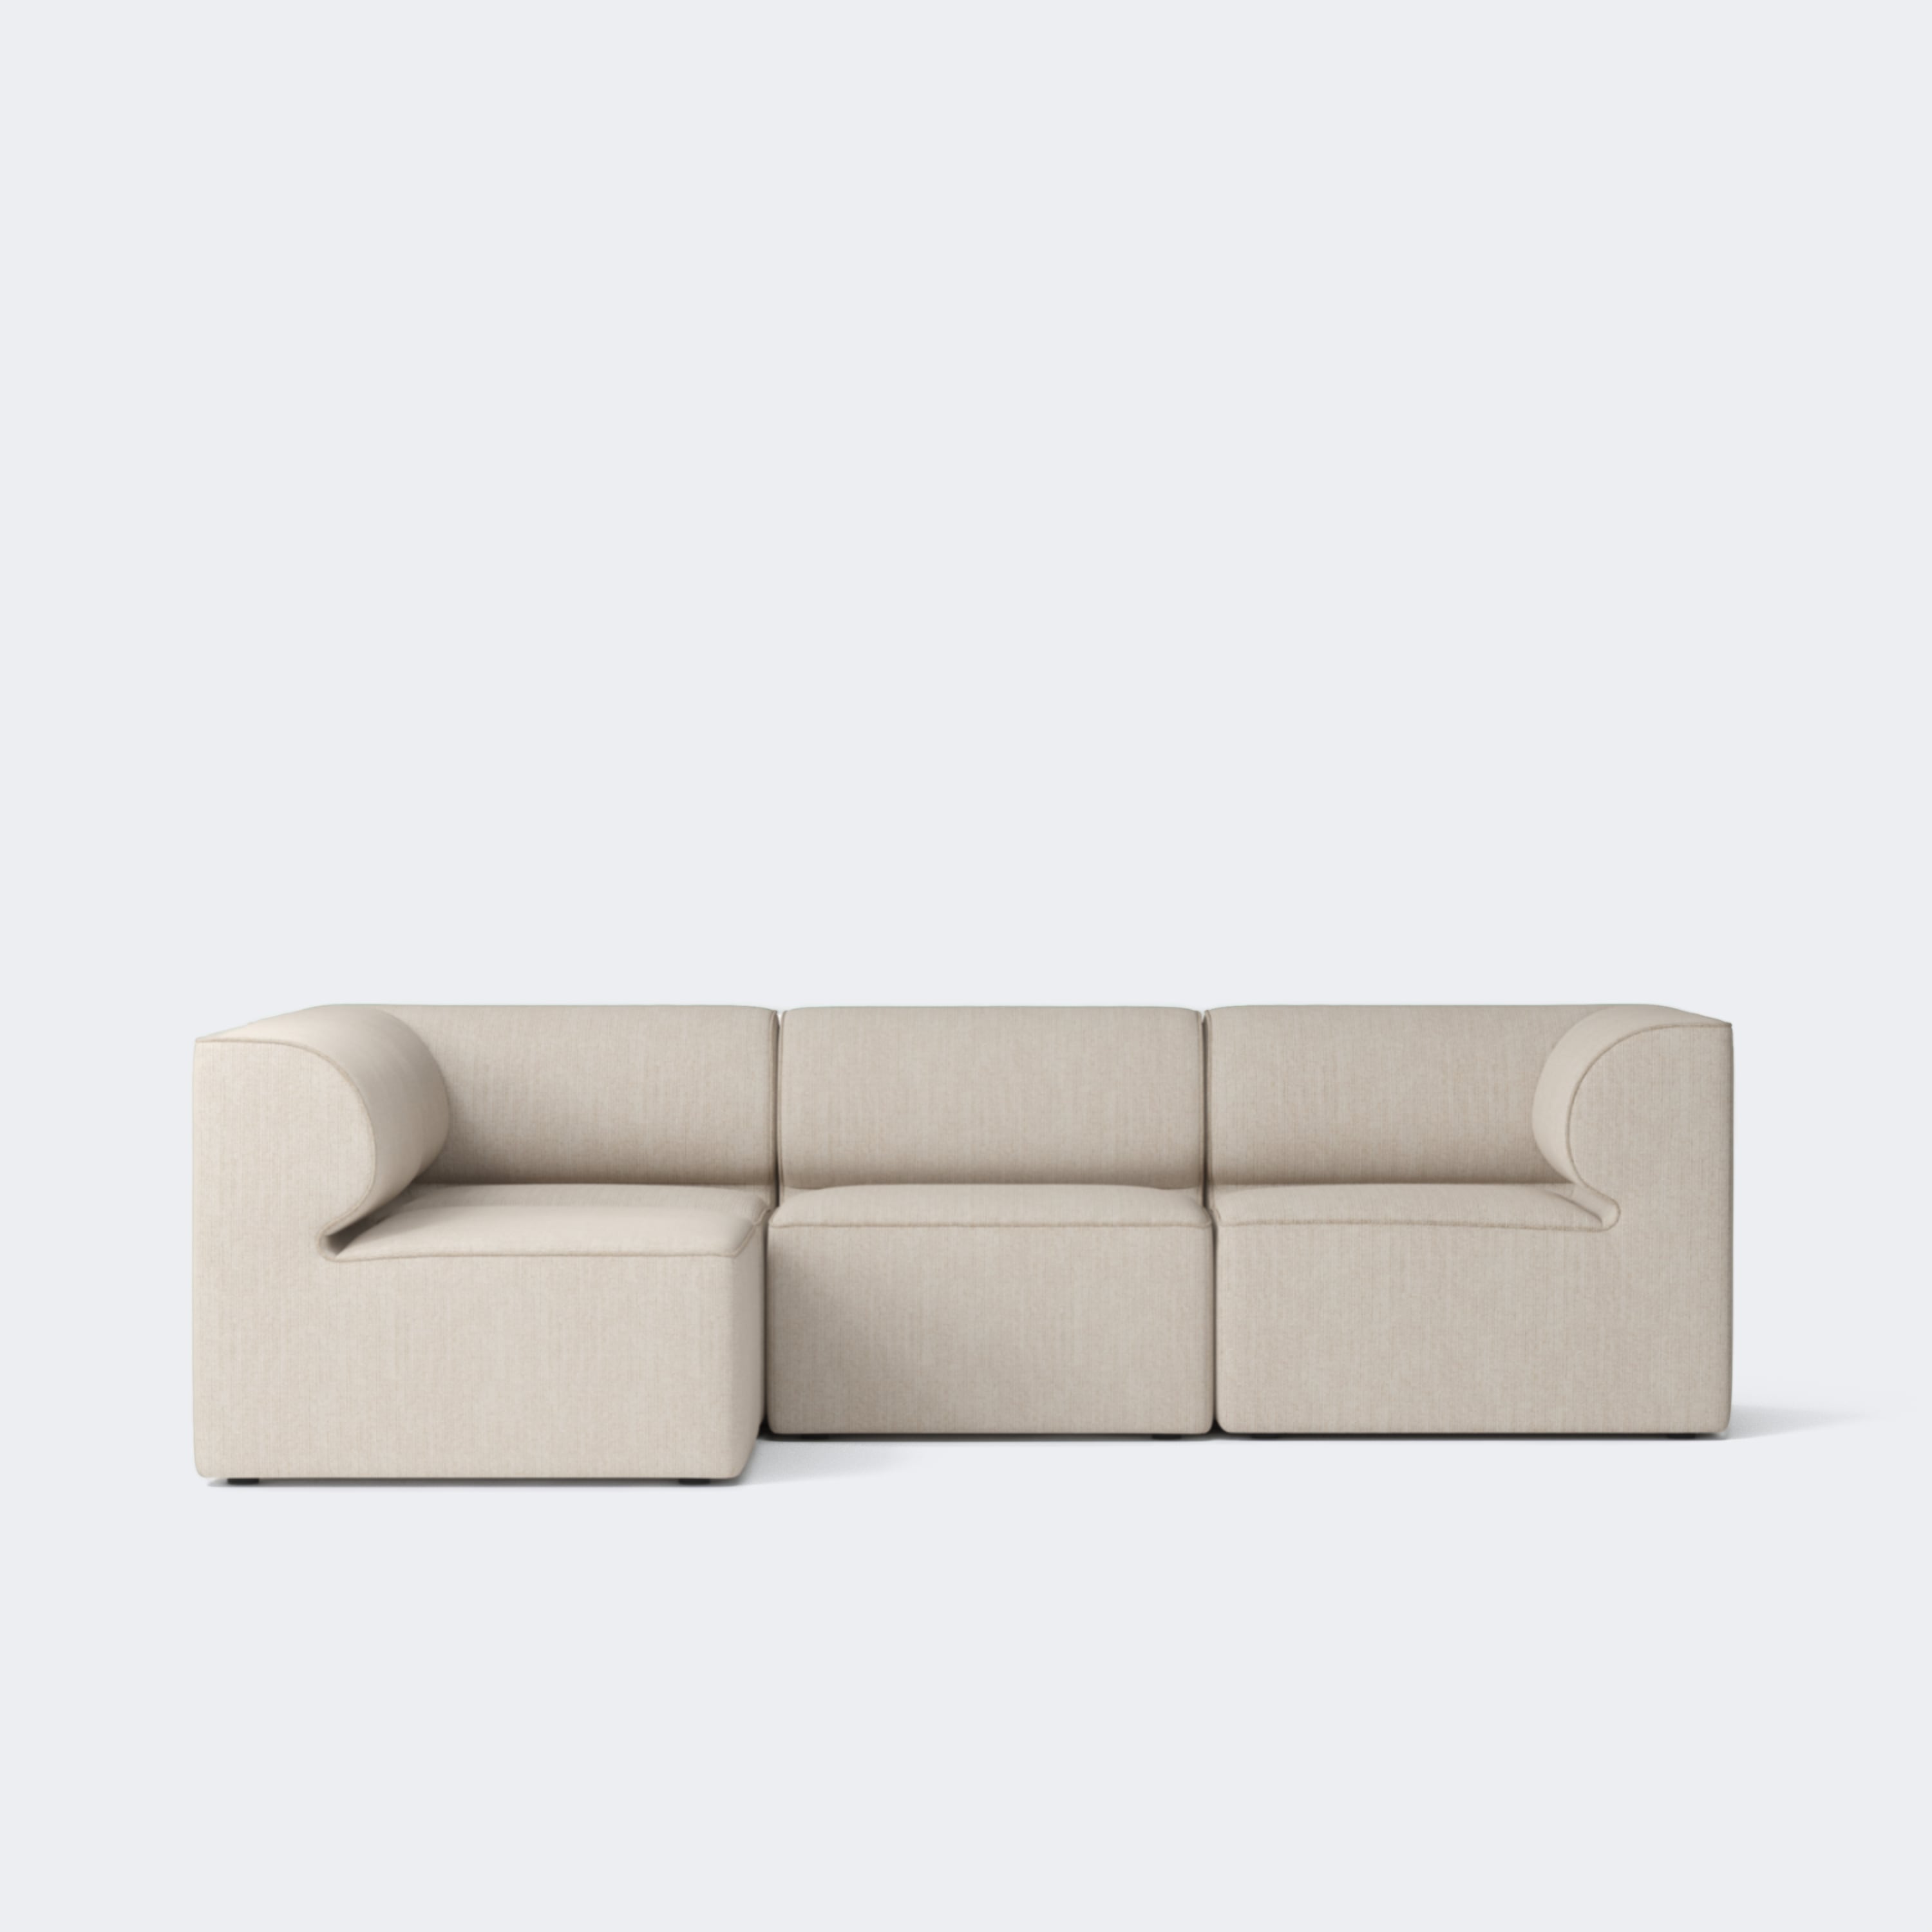 Audo Copenhagen Eave Sectional Sofa, 4-Seater Made To Order (10-12 Weeks) 4-Seater | Left Section Savanna #202 (Cream) - KANSO